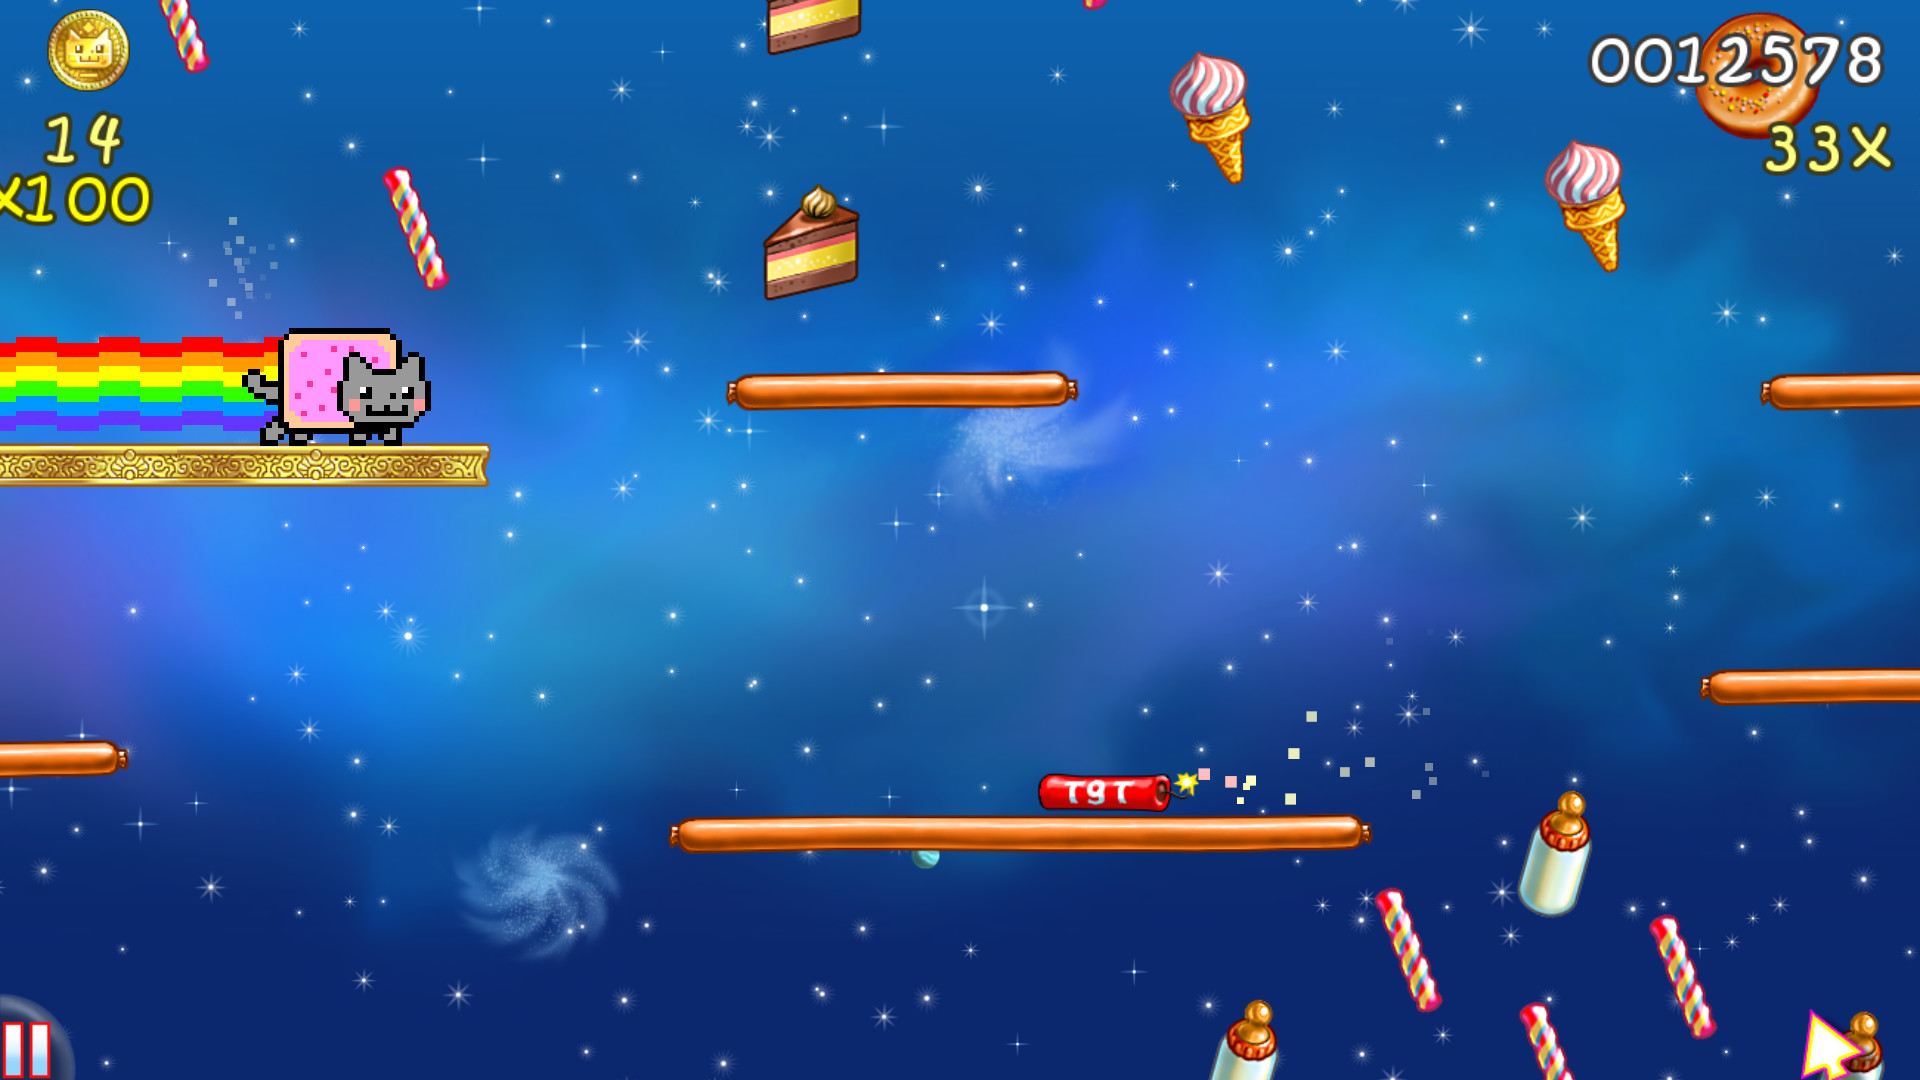 nyan cat lost in space download pc